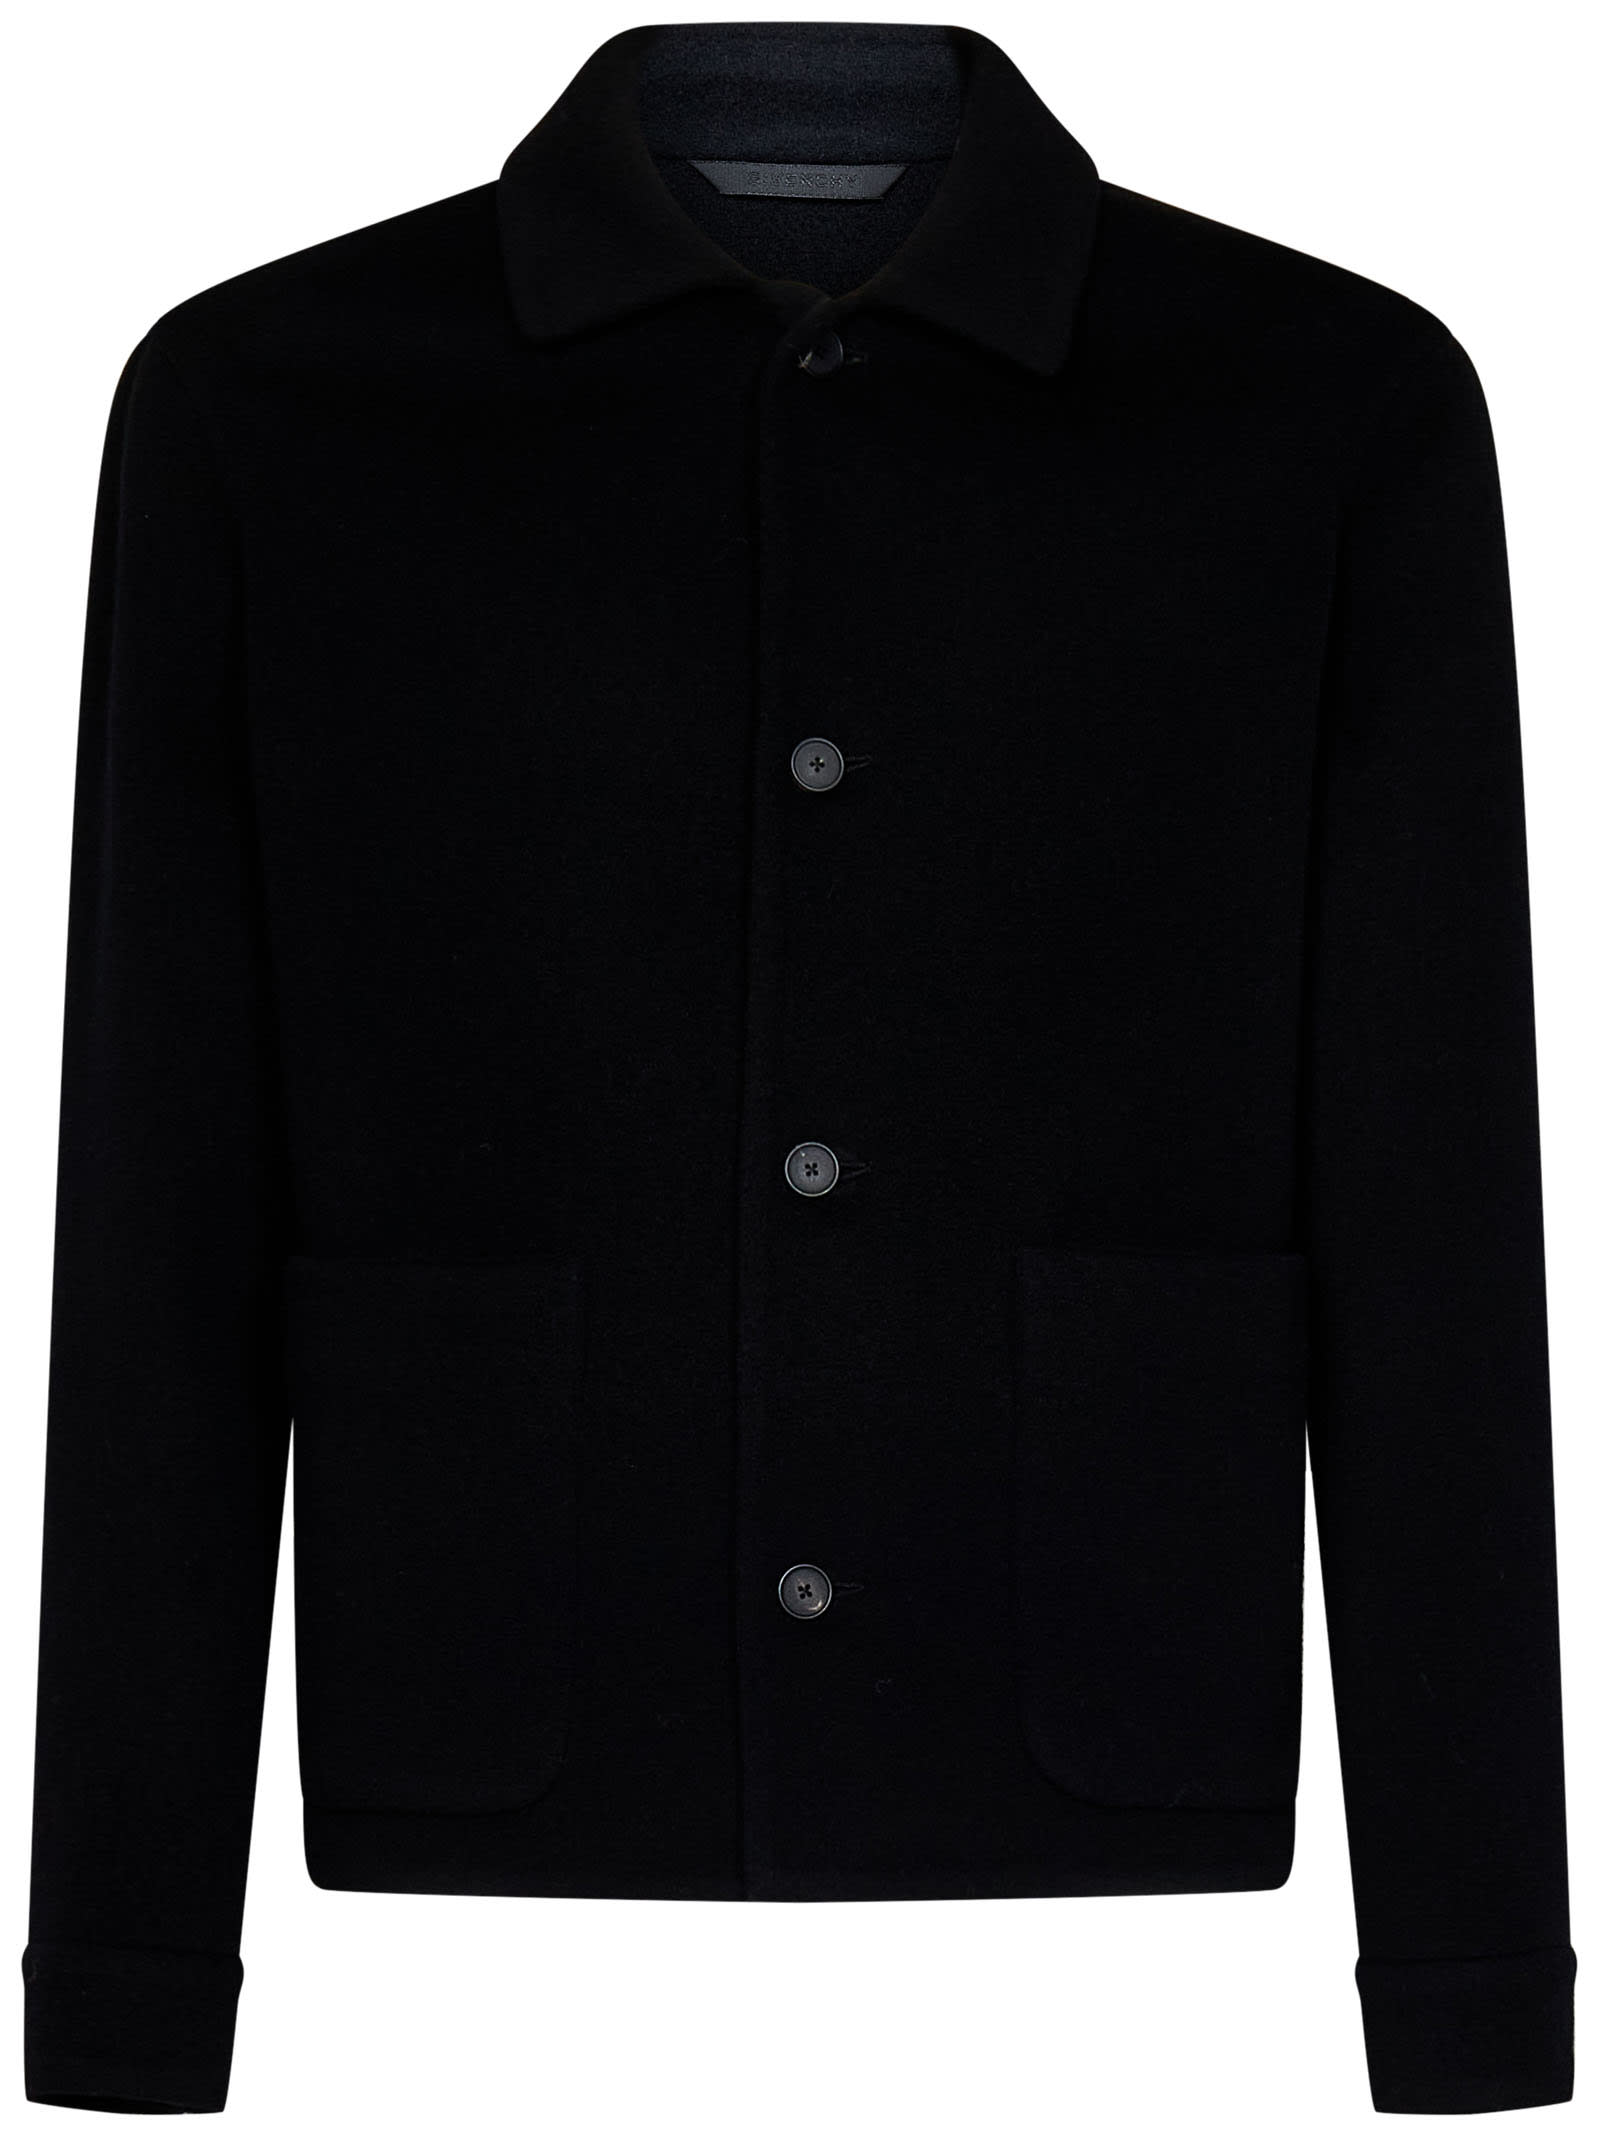 Wool And Cashmere Jacket